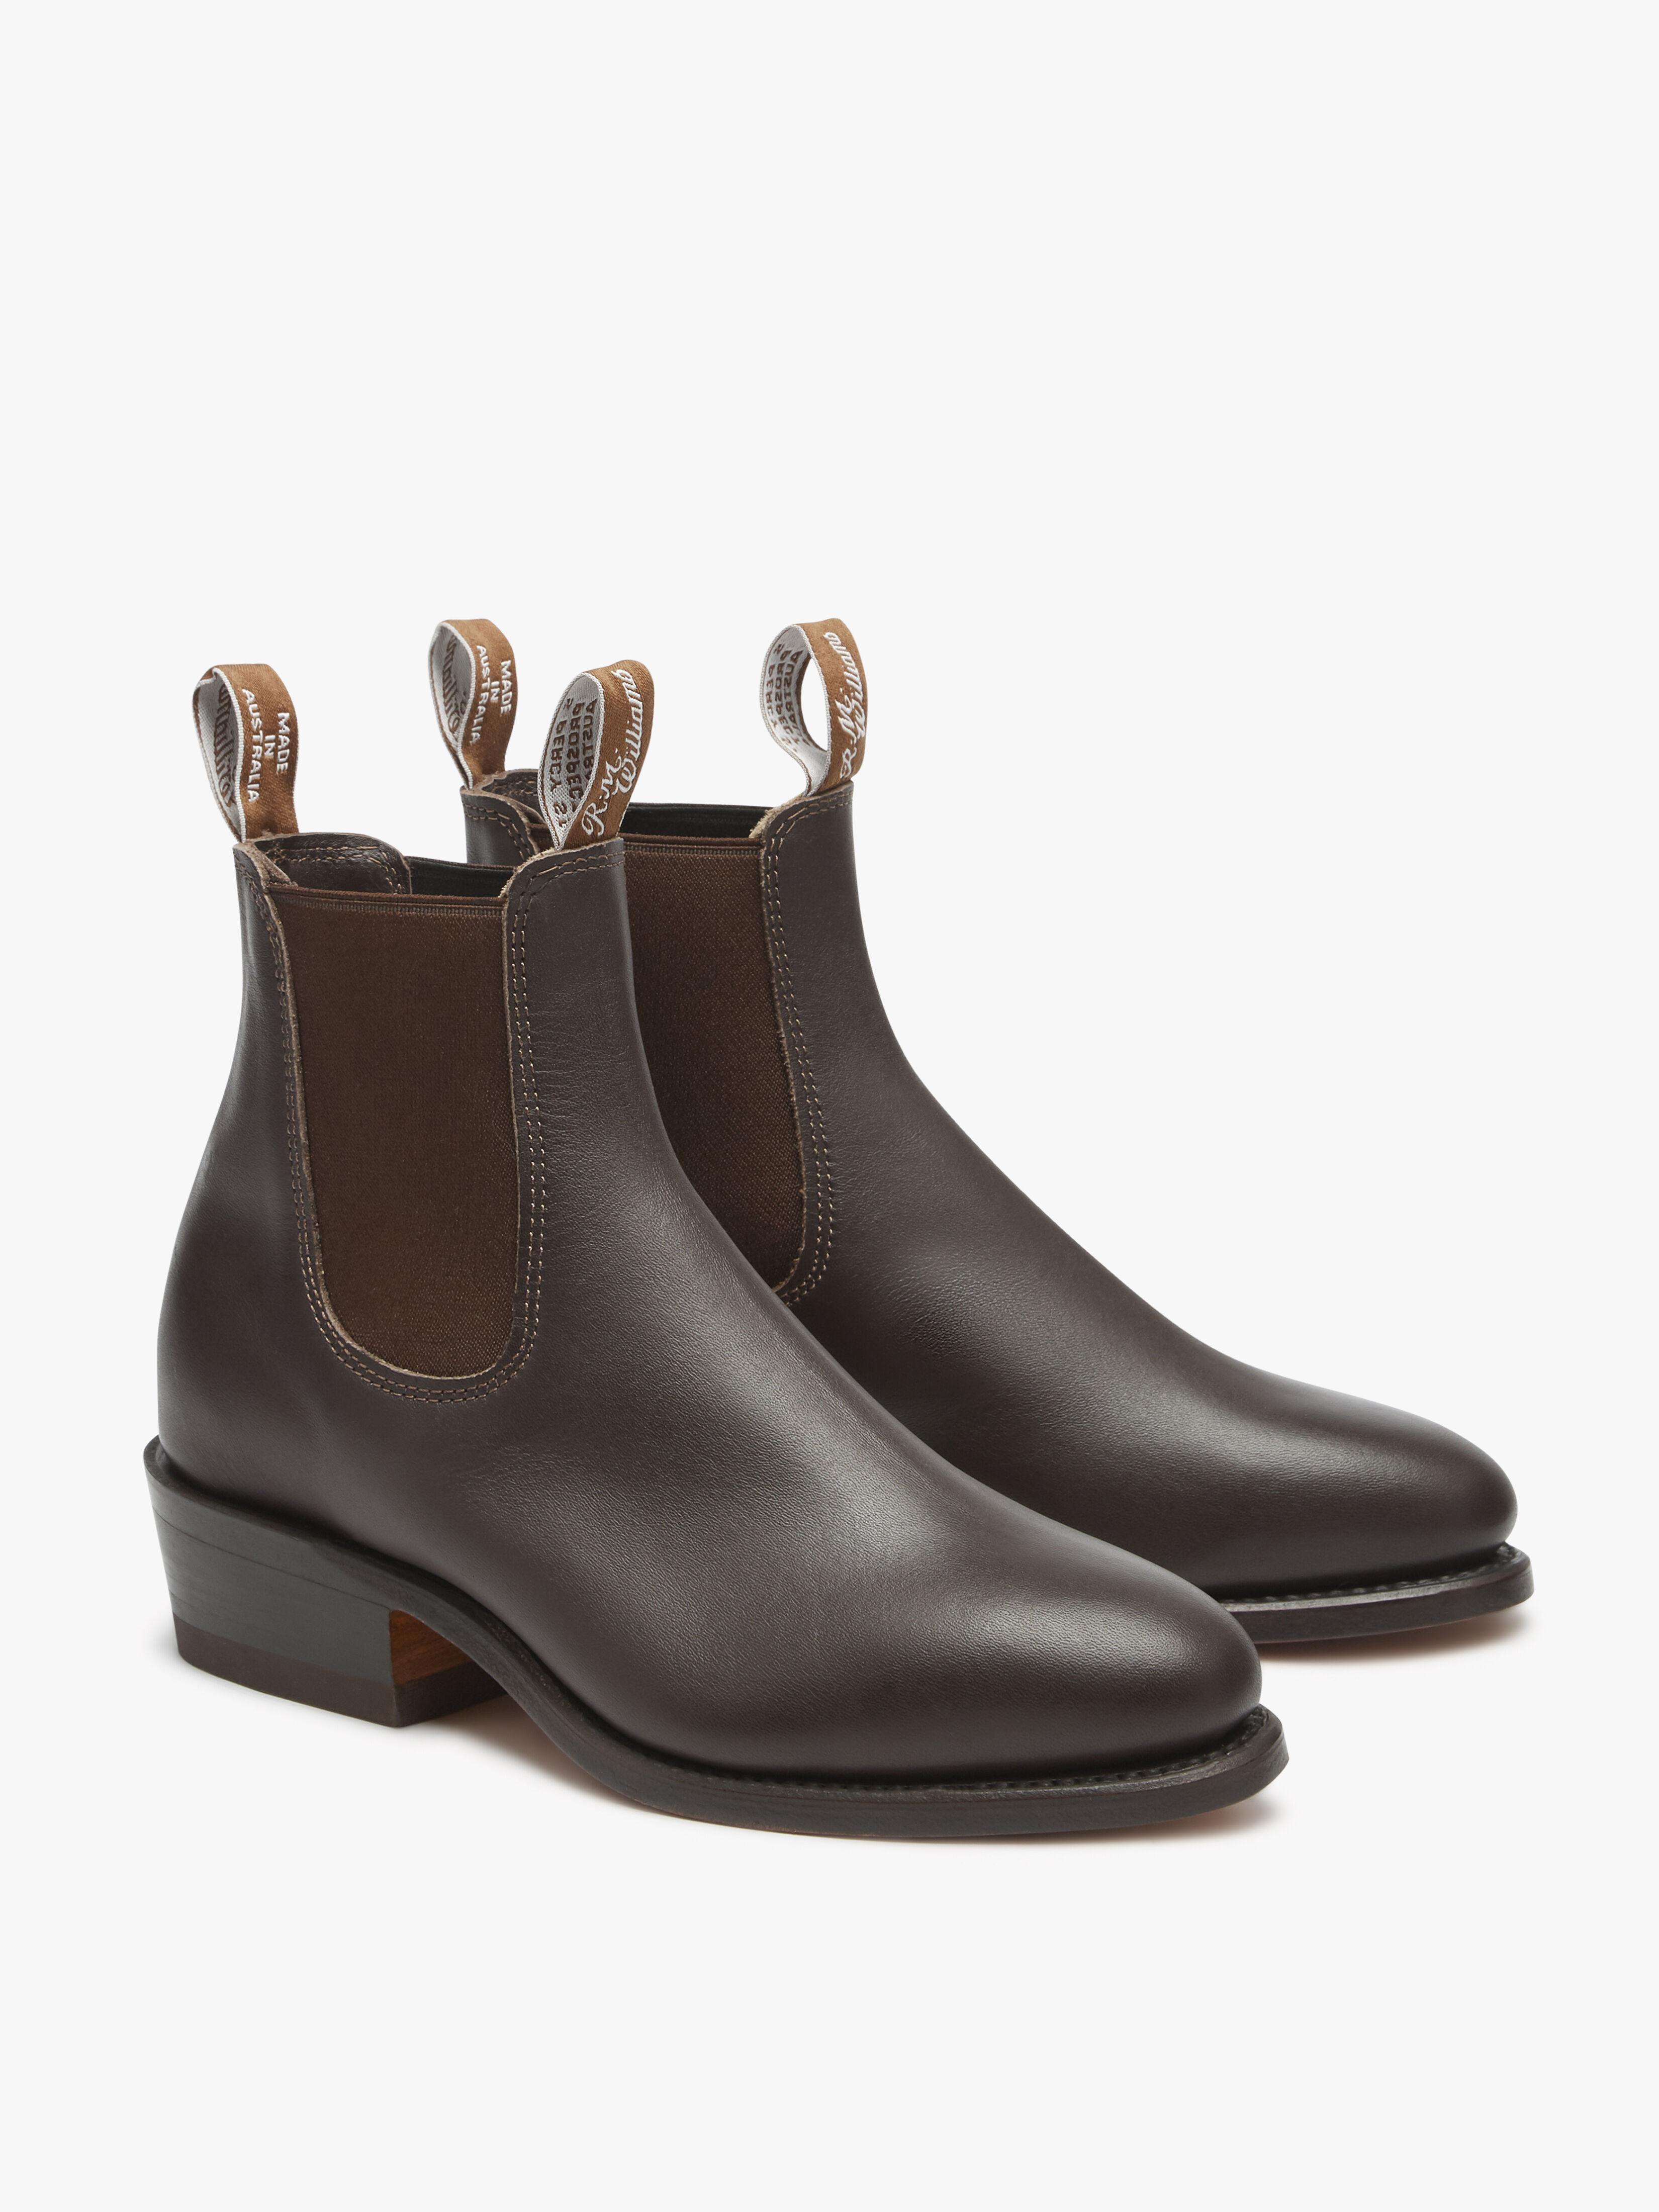 rm williams chestnut boots